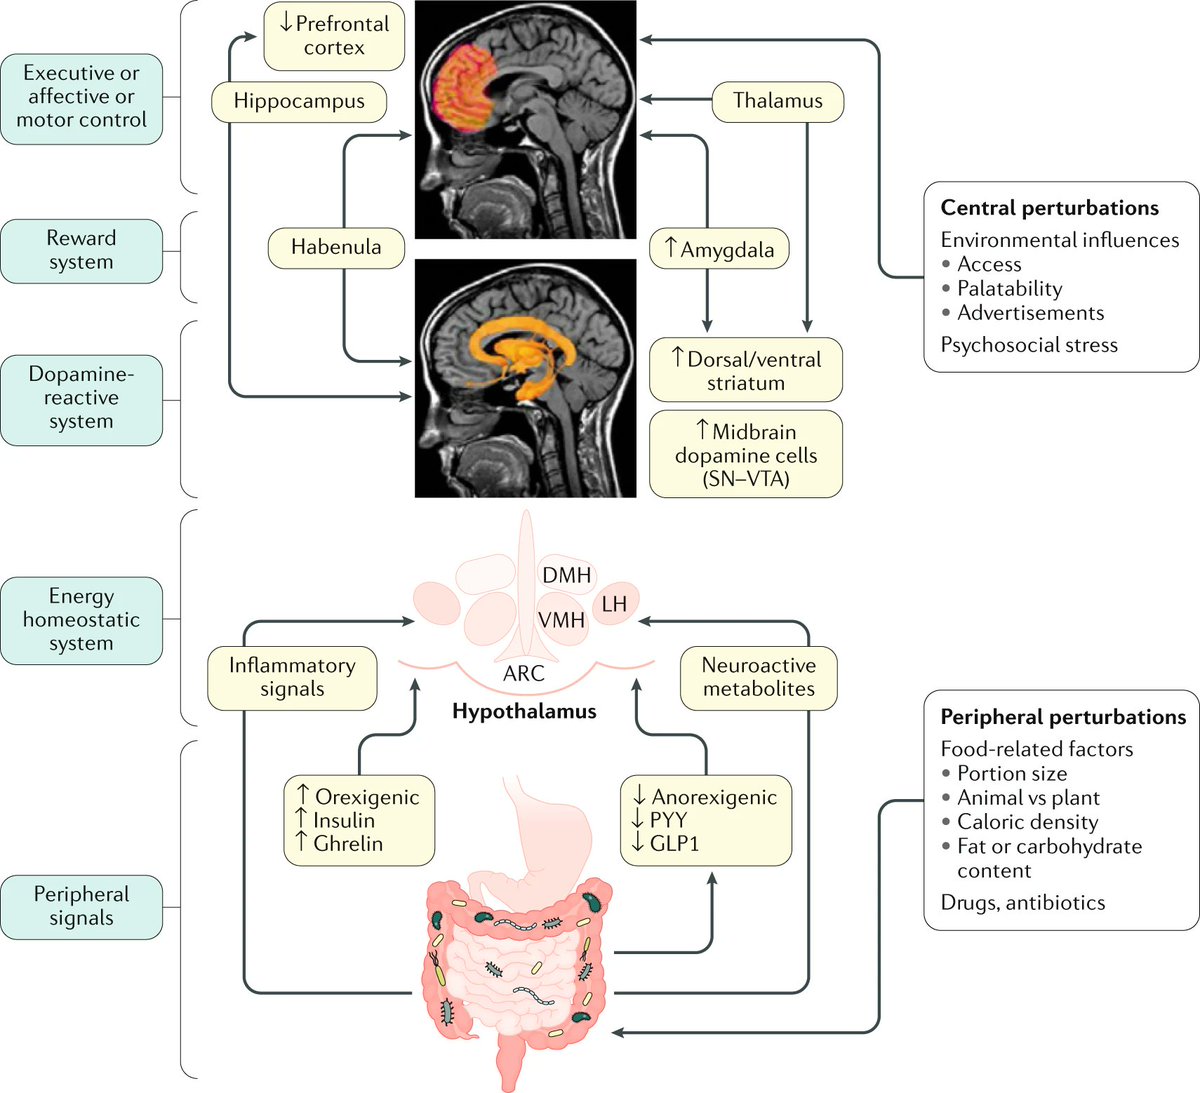 Get insights into brain–gut–#microbiome interactions in #obesity and food addiction in this REVIEW rdcu.be/clx9Q #WDHD2021